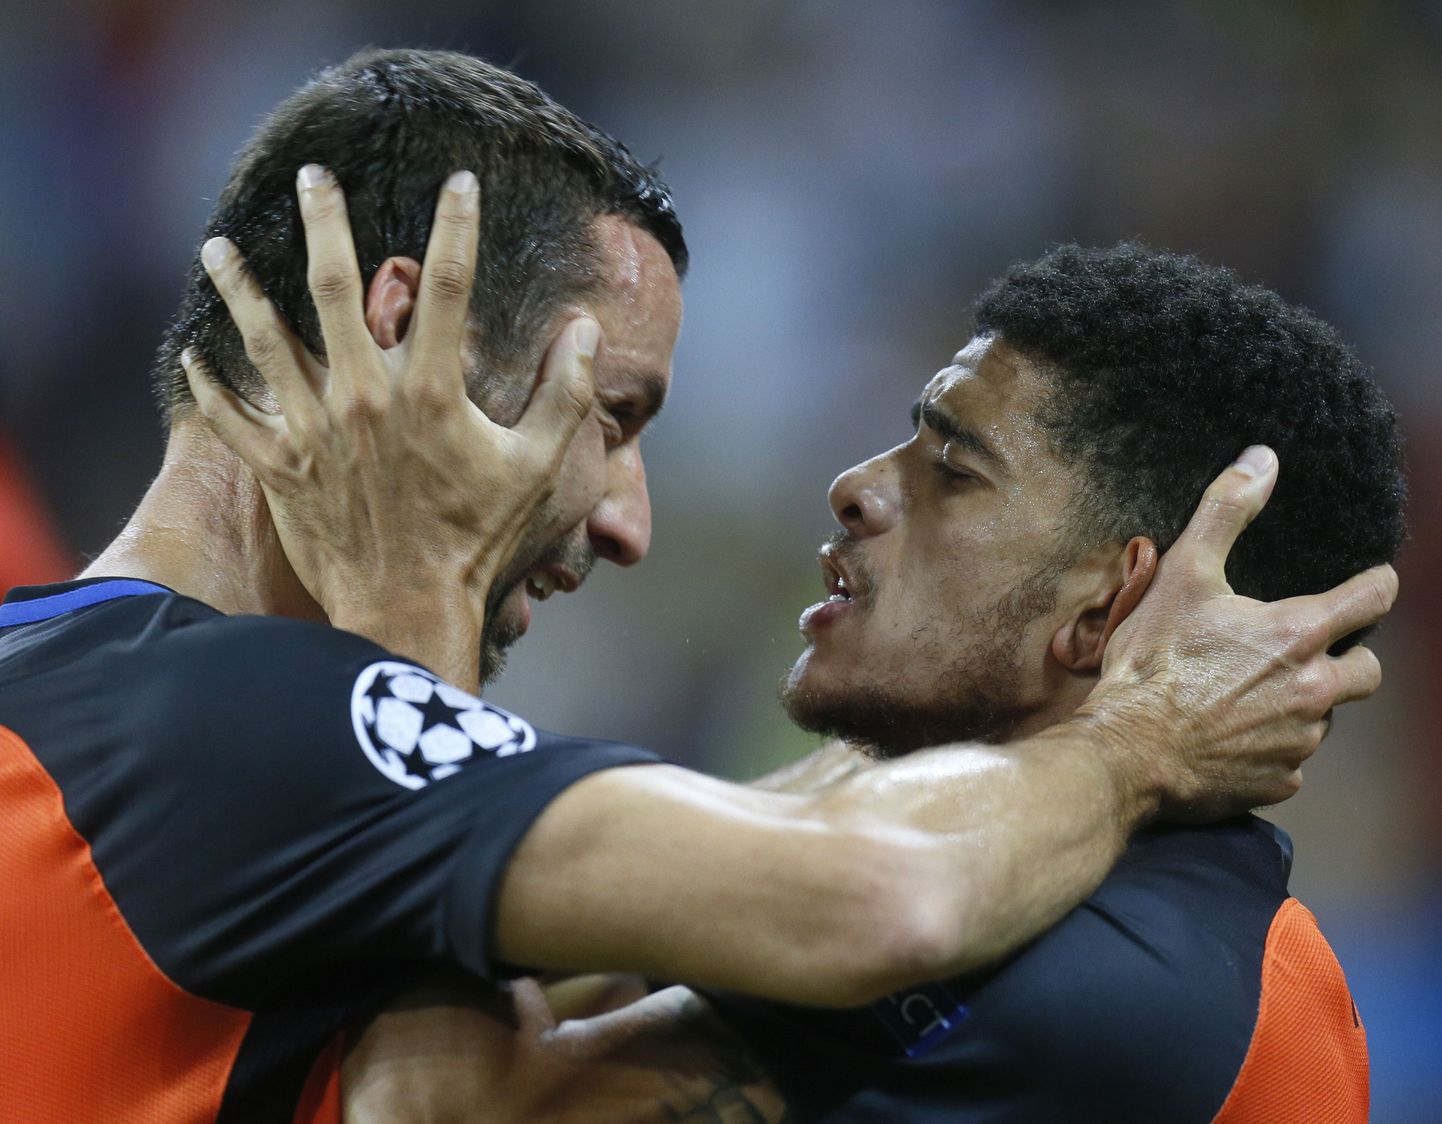 Shakhtar's Taison, right, celebrates with his teammate Dario Srna after scoring his side's first goal during the Group F Champions League soccer match between Shakhtar Donetsk and Napoli at the Metalist Stadium in Kharkiv, Ukraine, Wednesday, Sept. 13, 2017. (AP Photo/Efrem Lukatsky)